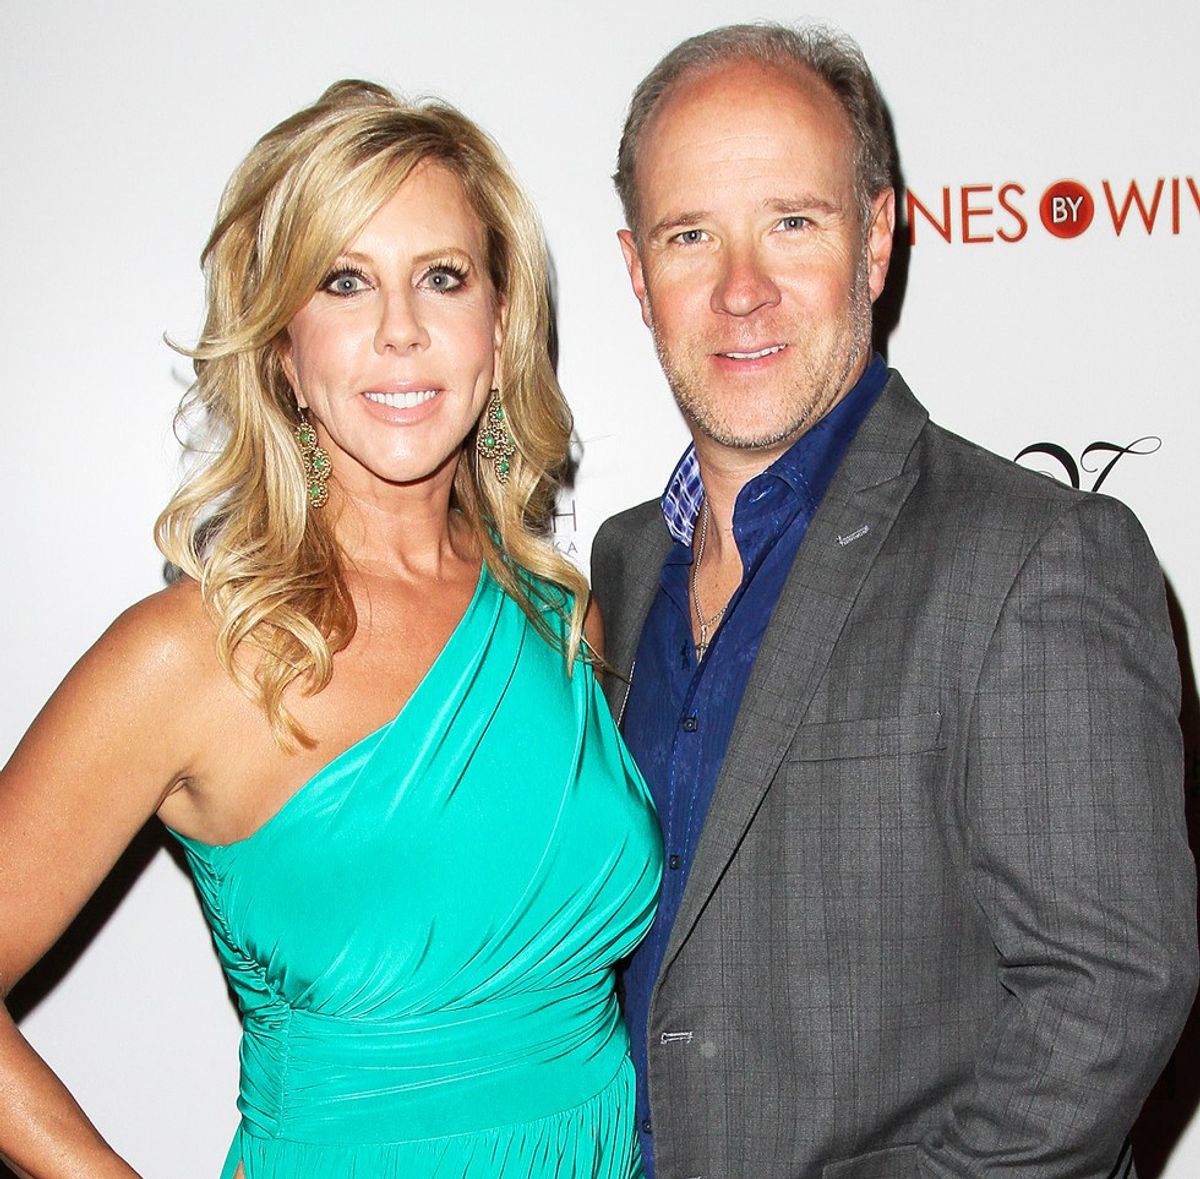 Why We Need To Stop Talking About Brooks Ayers